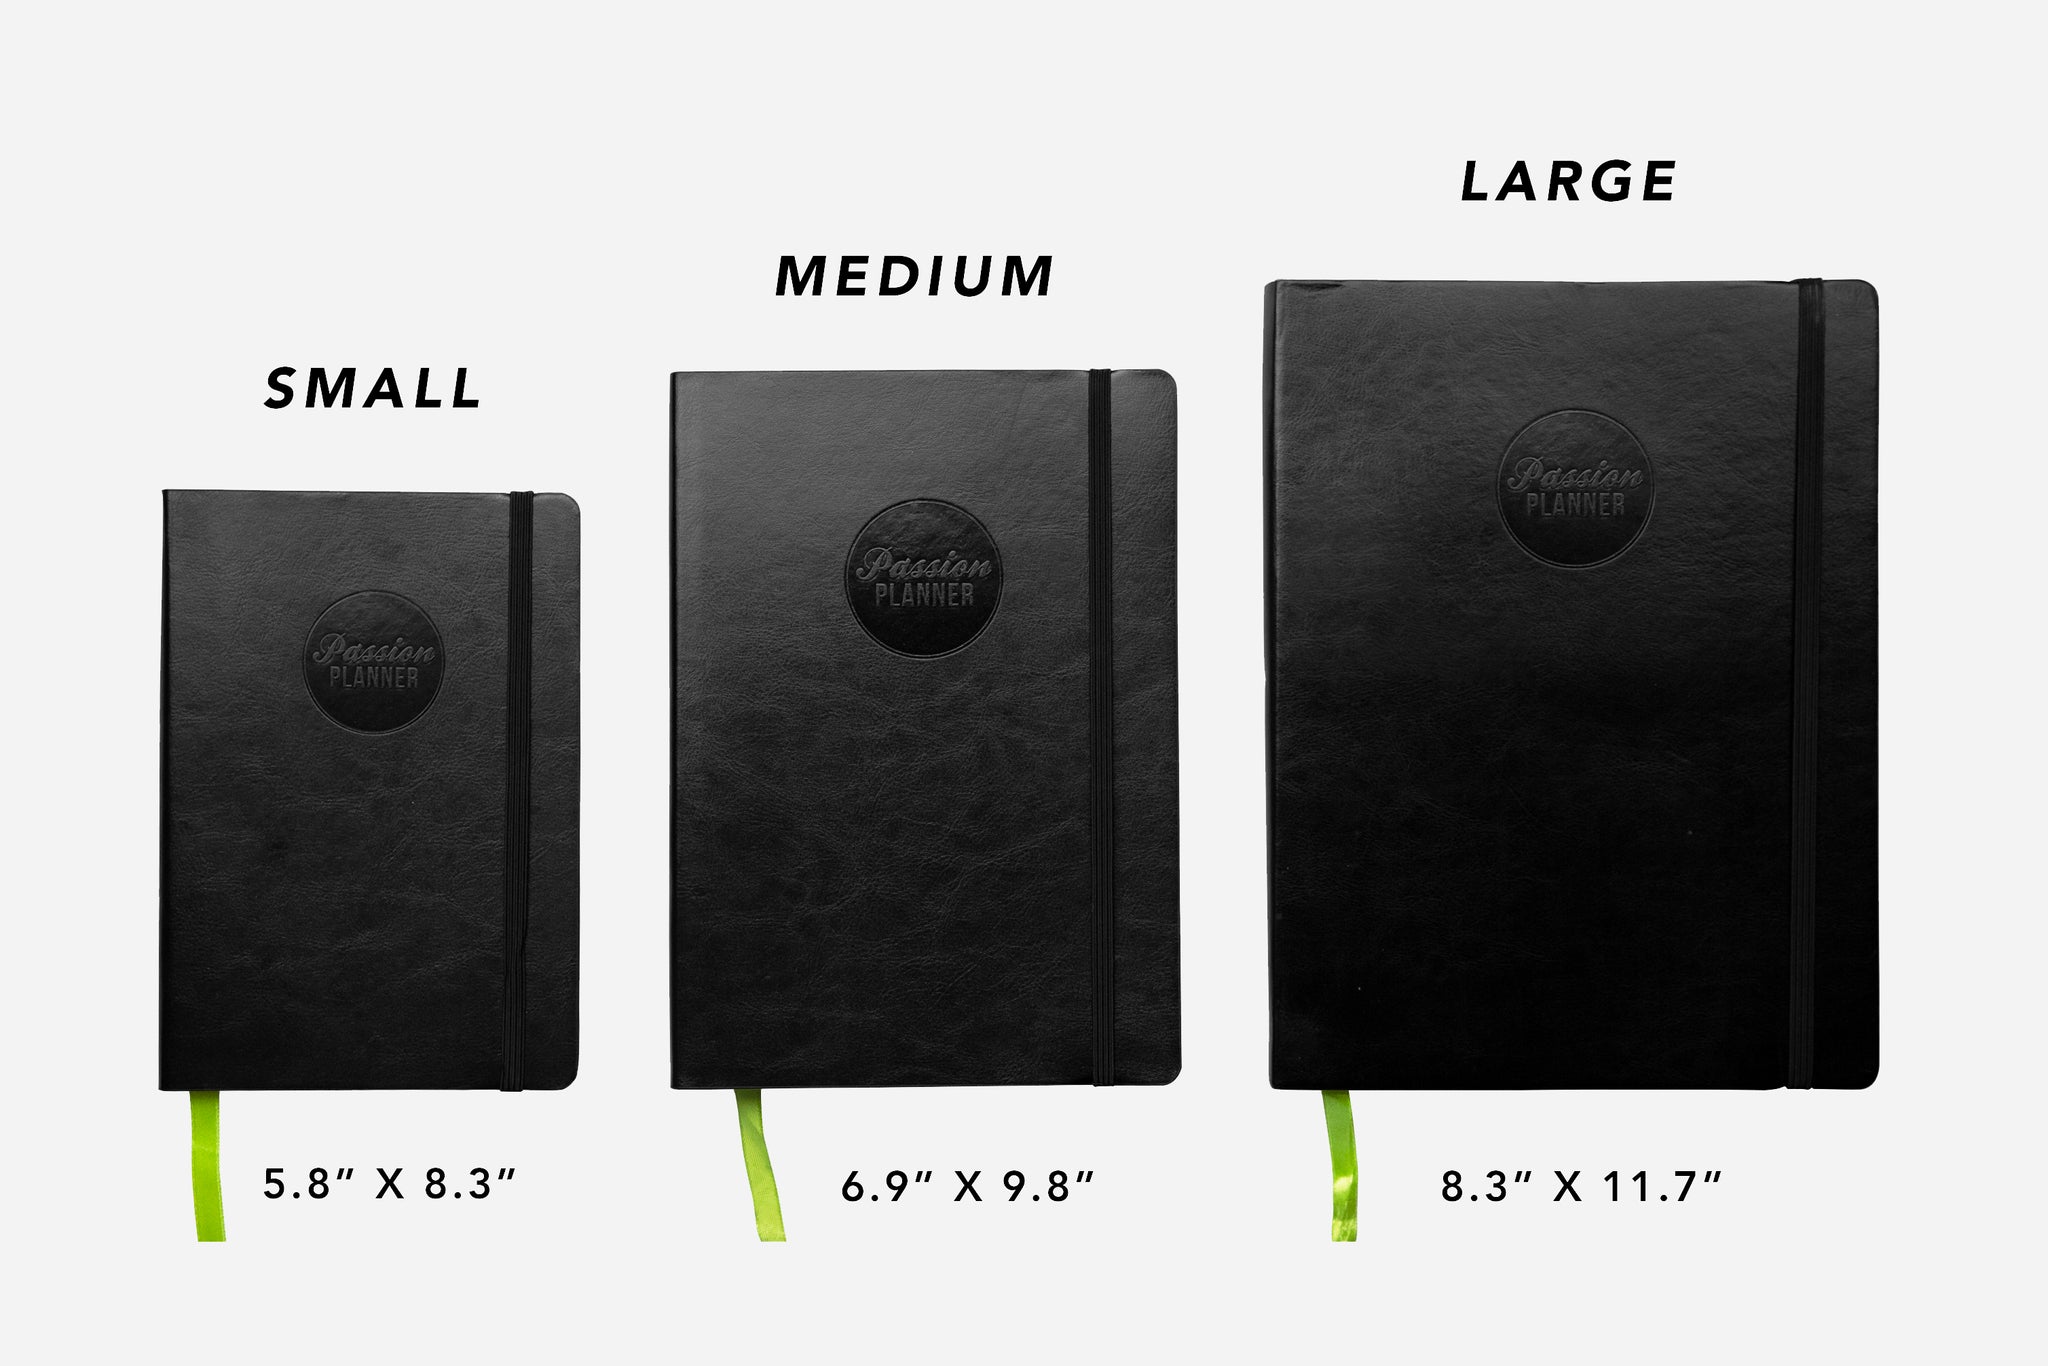 Passion Planner Size Differences